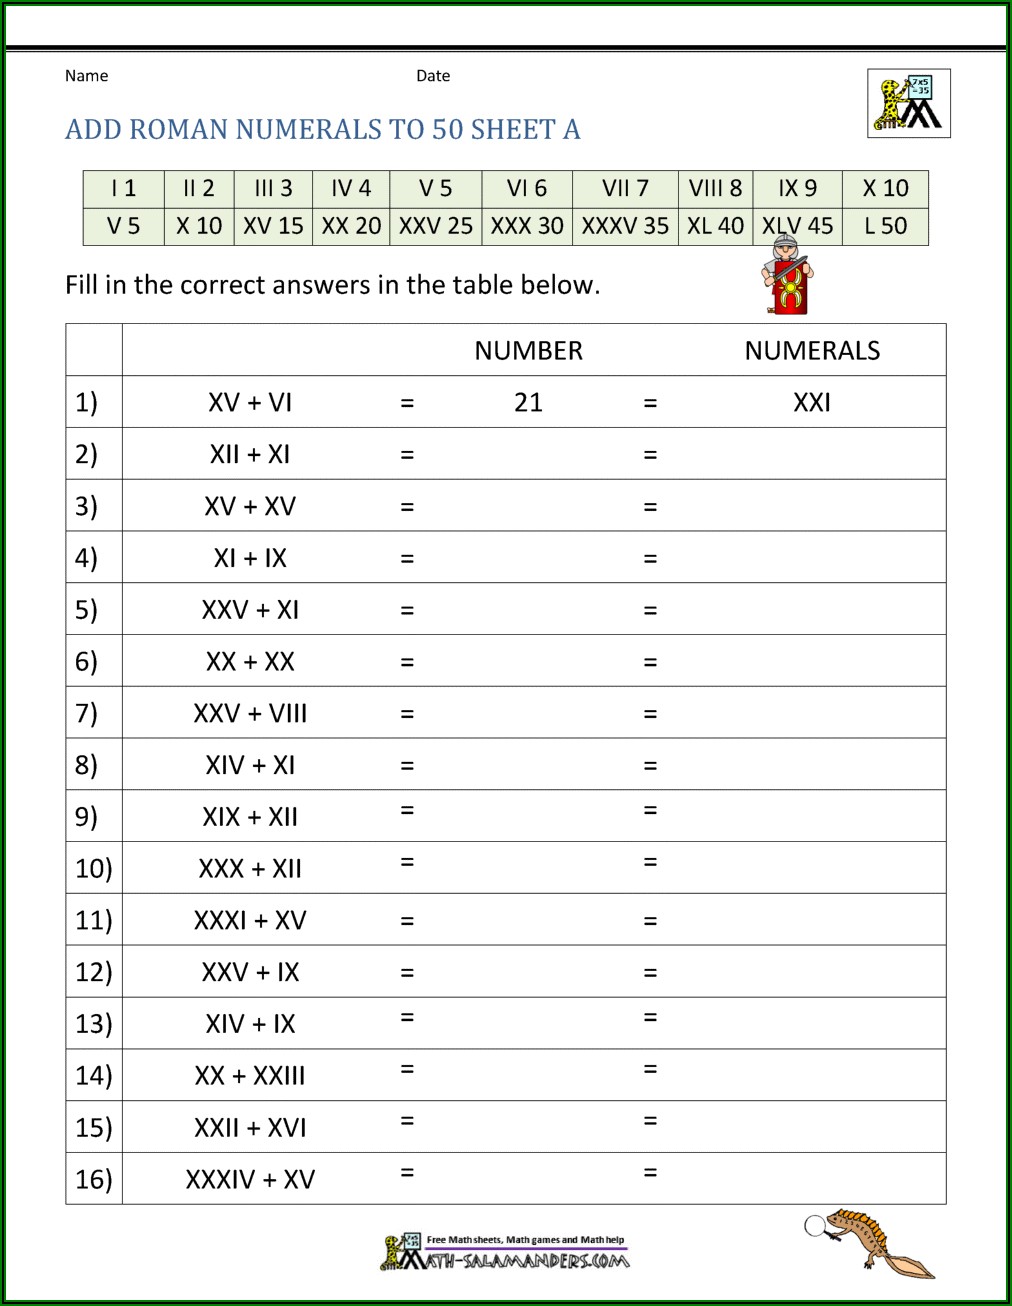 Roman Numerals Worksheet For Class 6